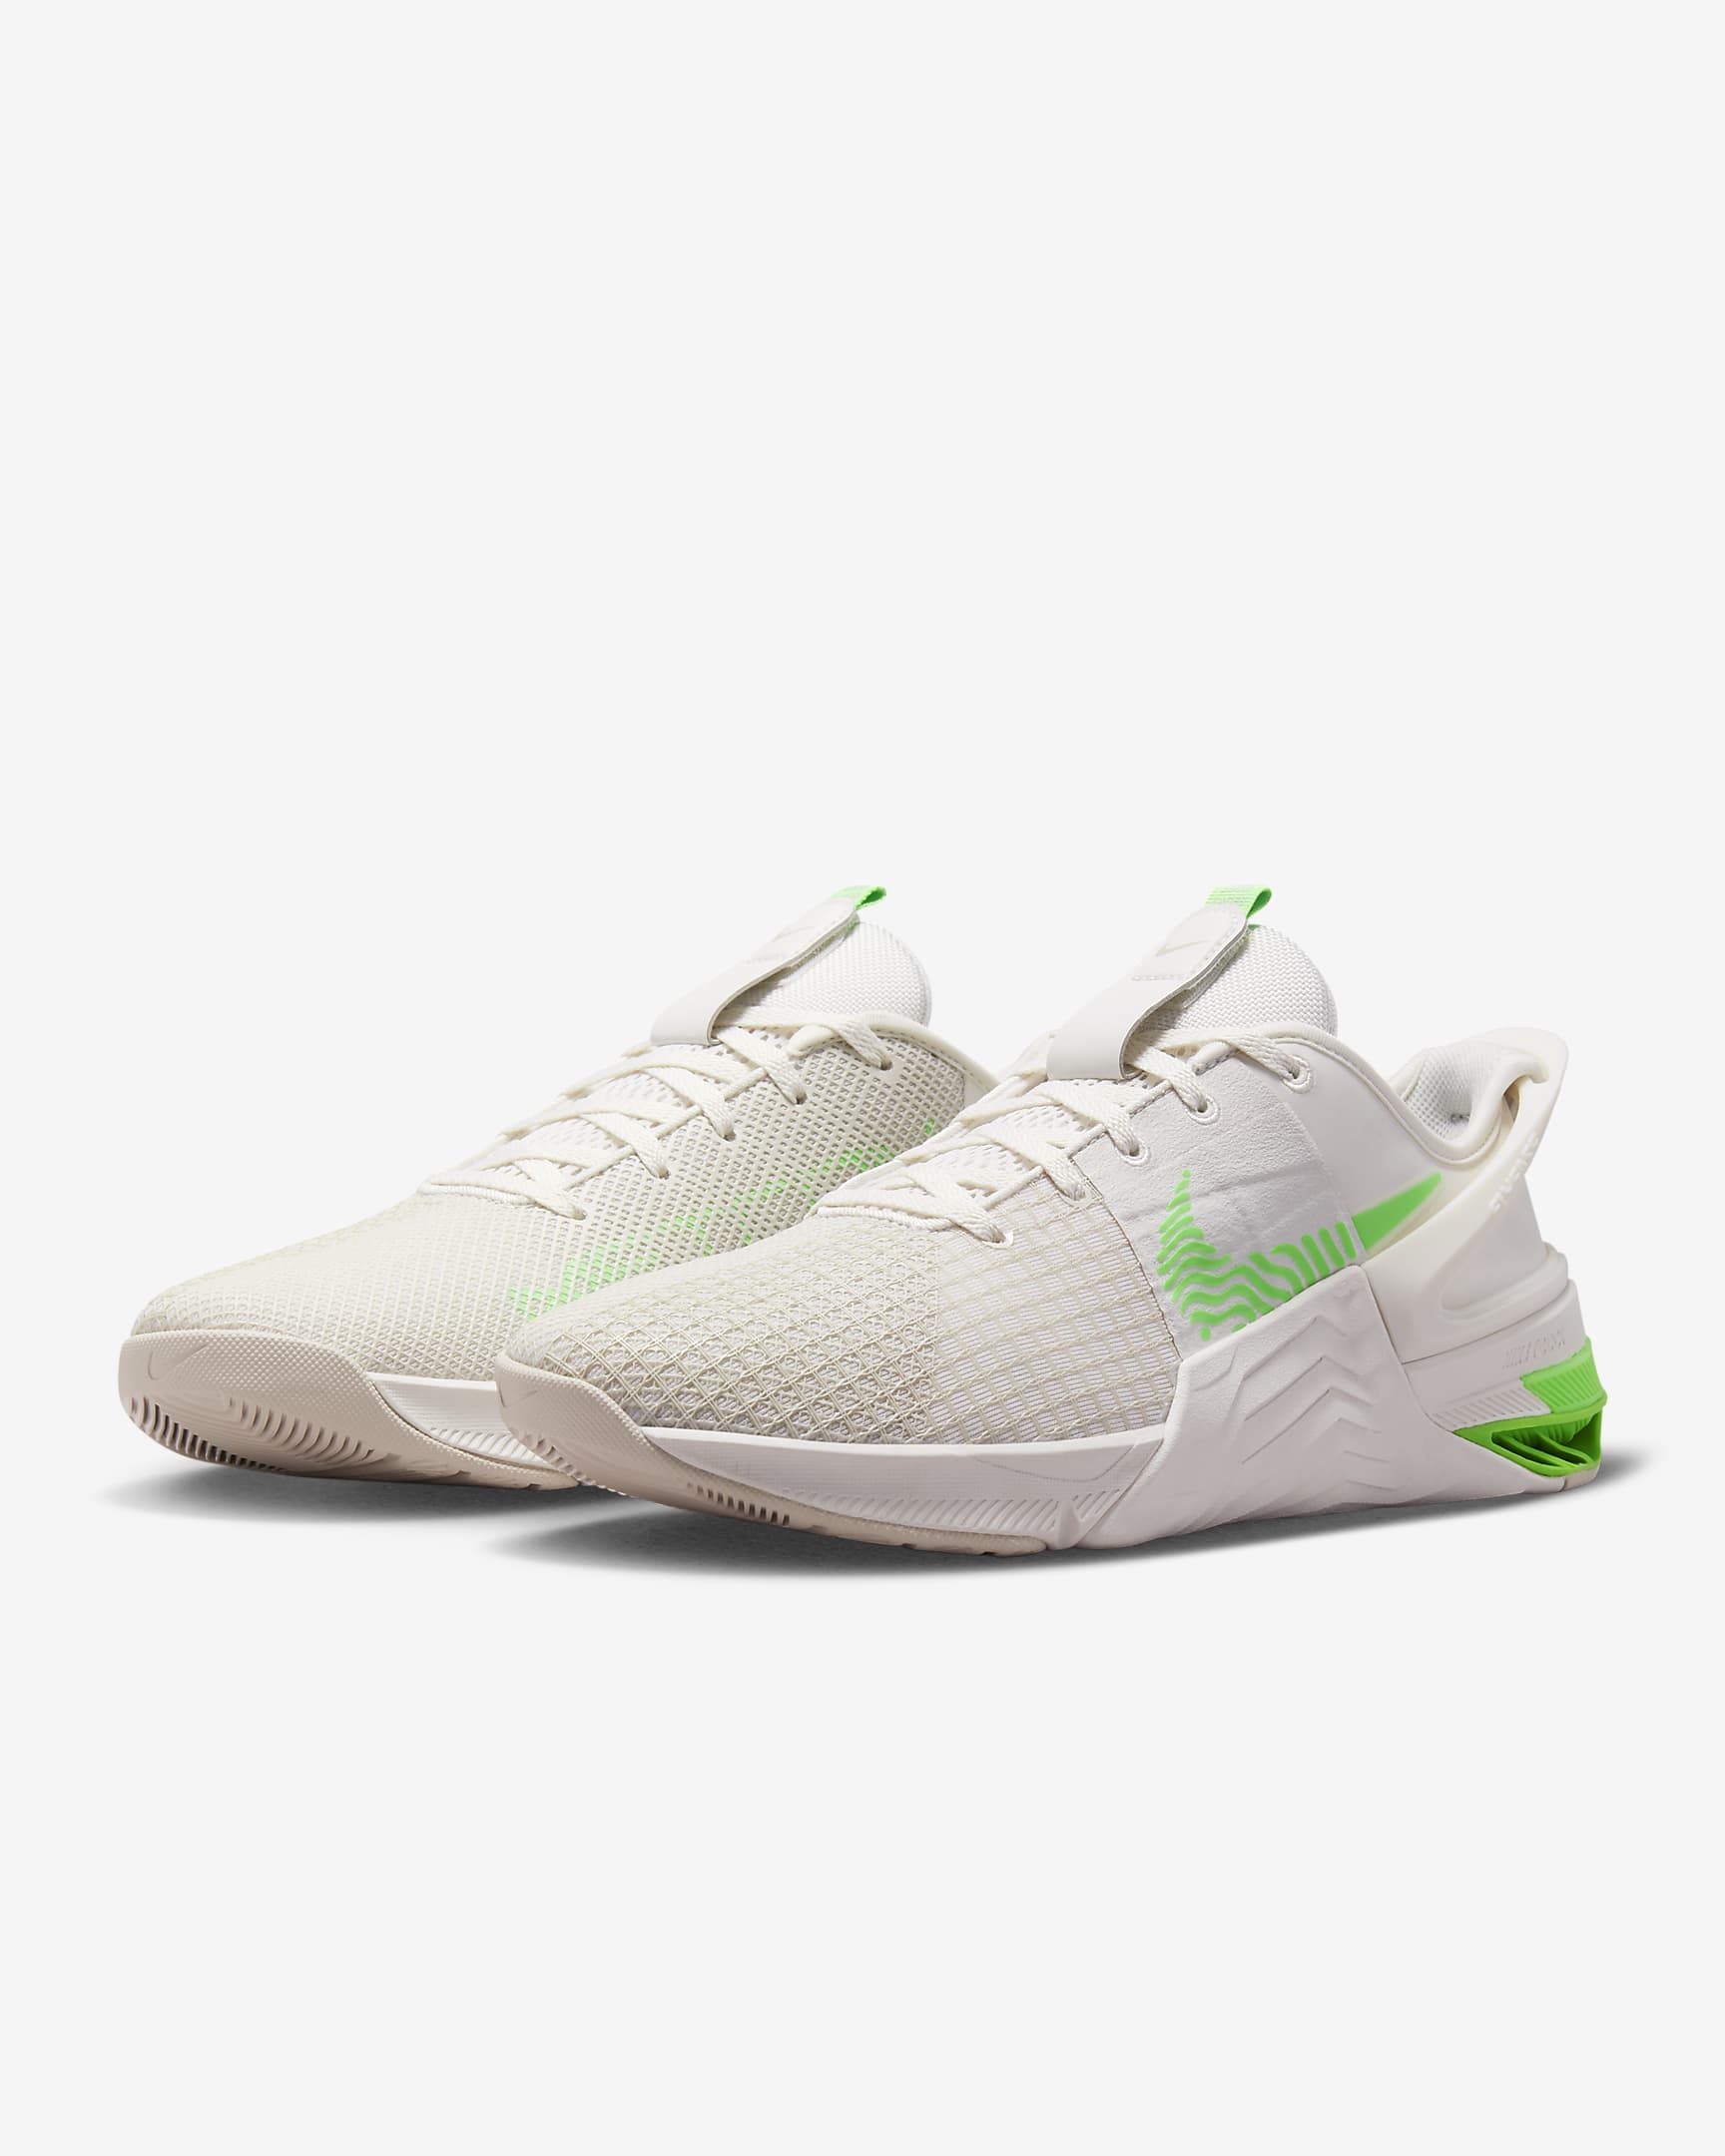 Nike Metcon 8 FlyEase Review: The Revolutionary Sneaker Changing the ...